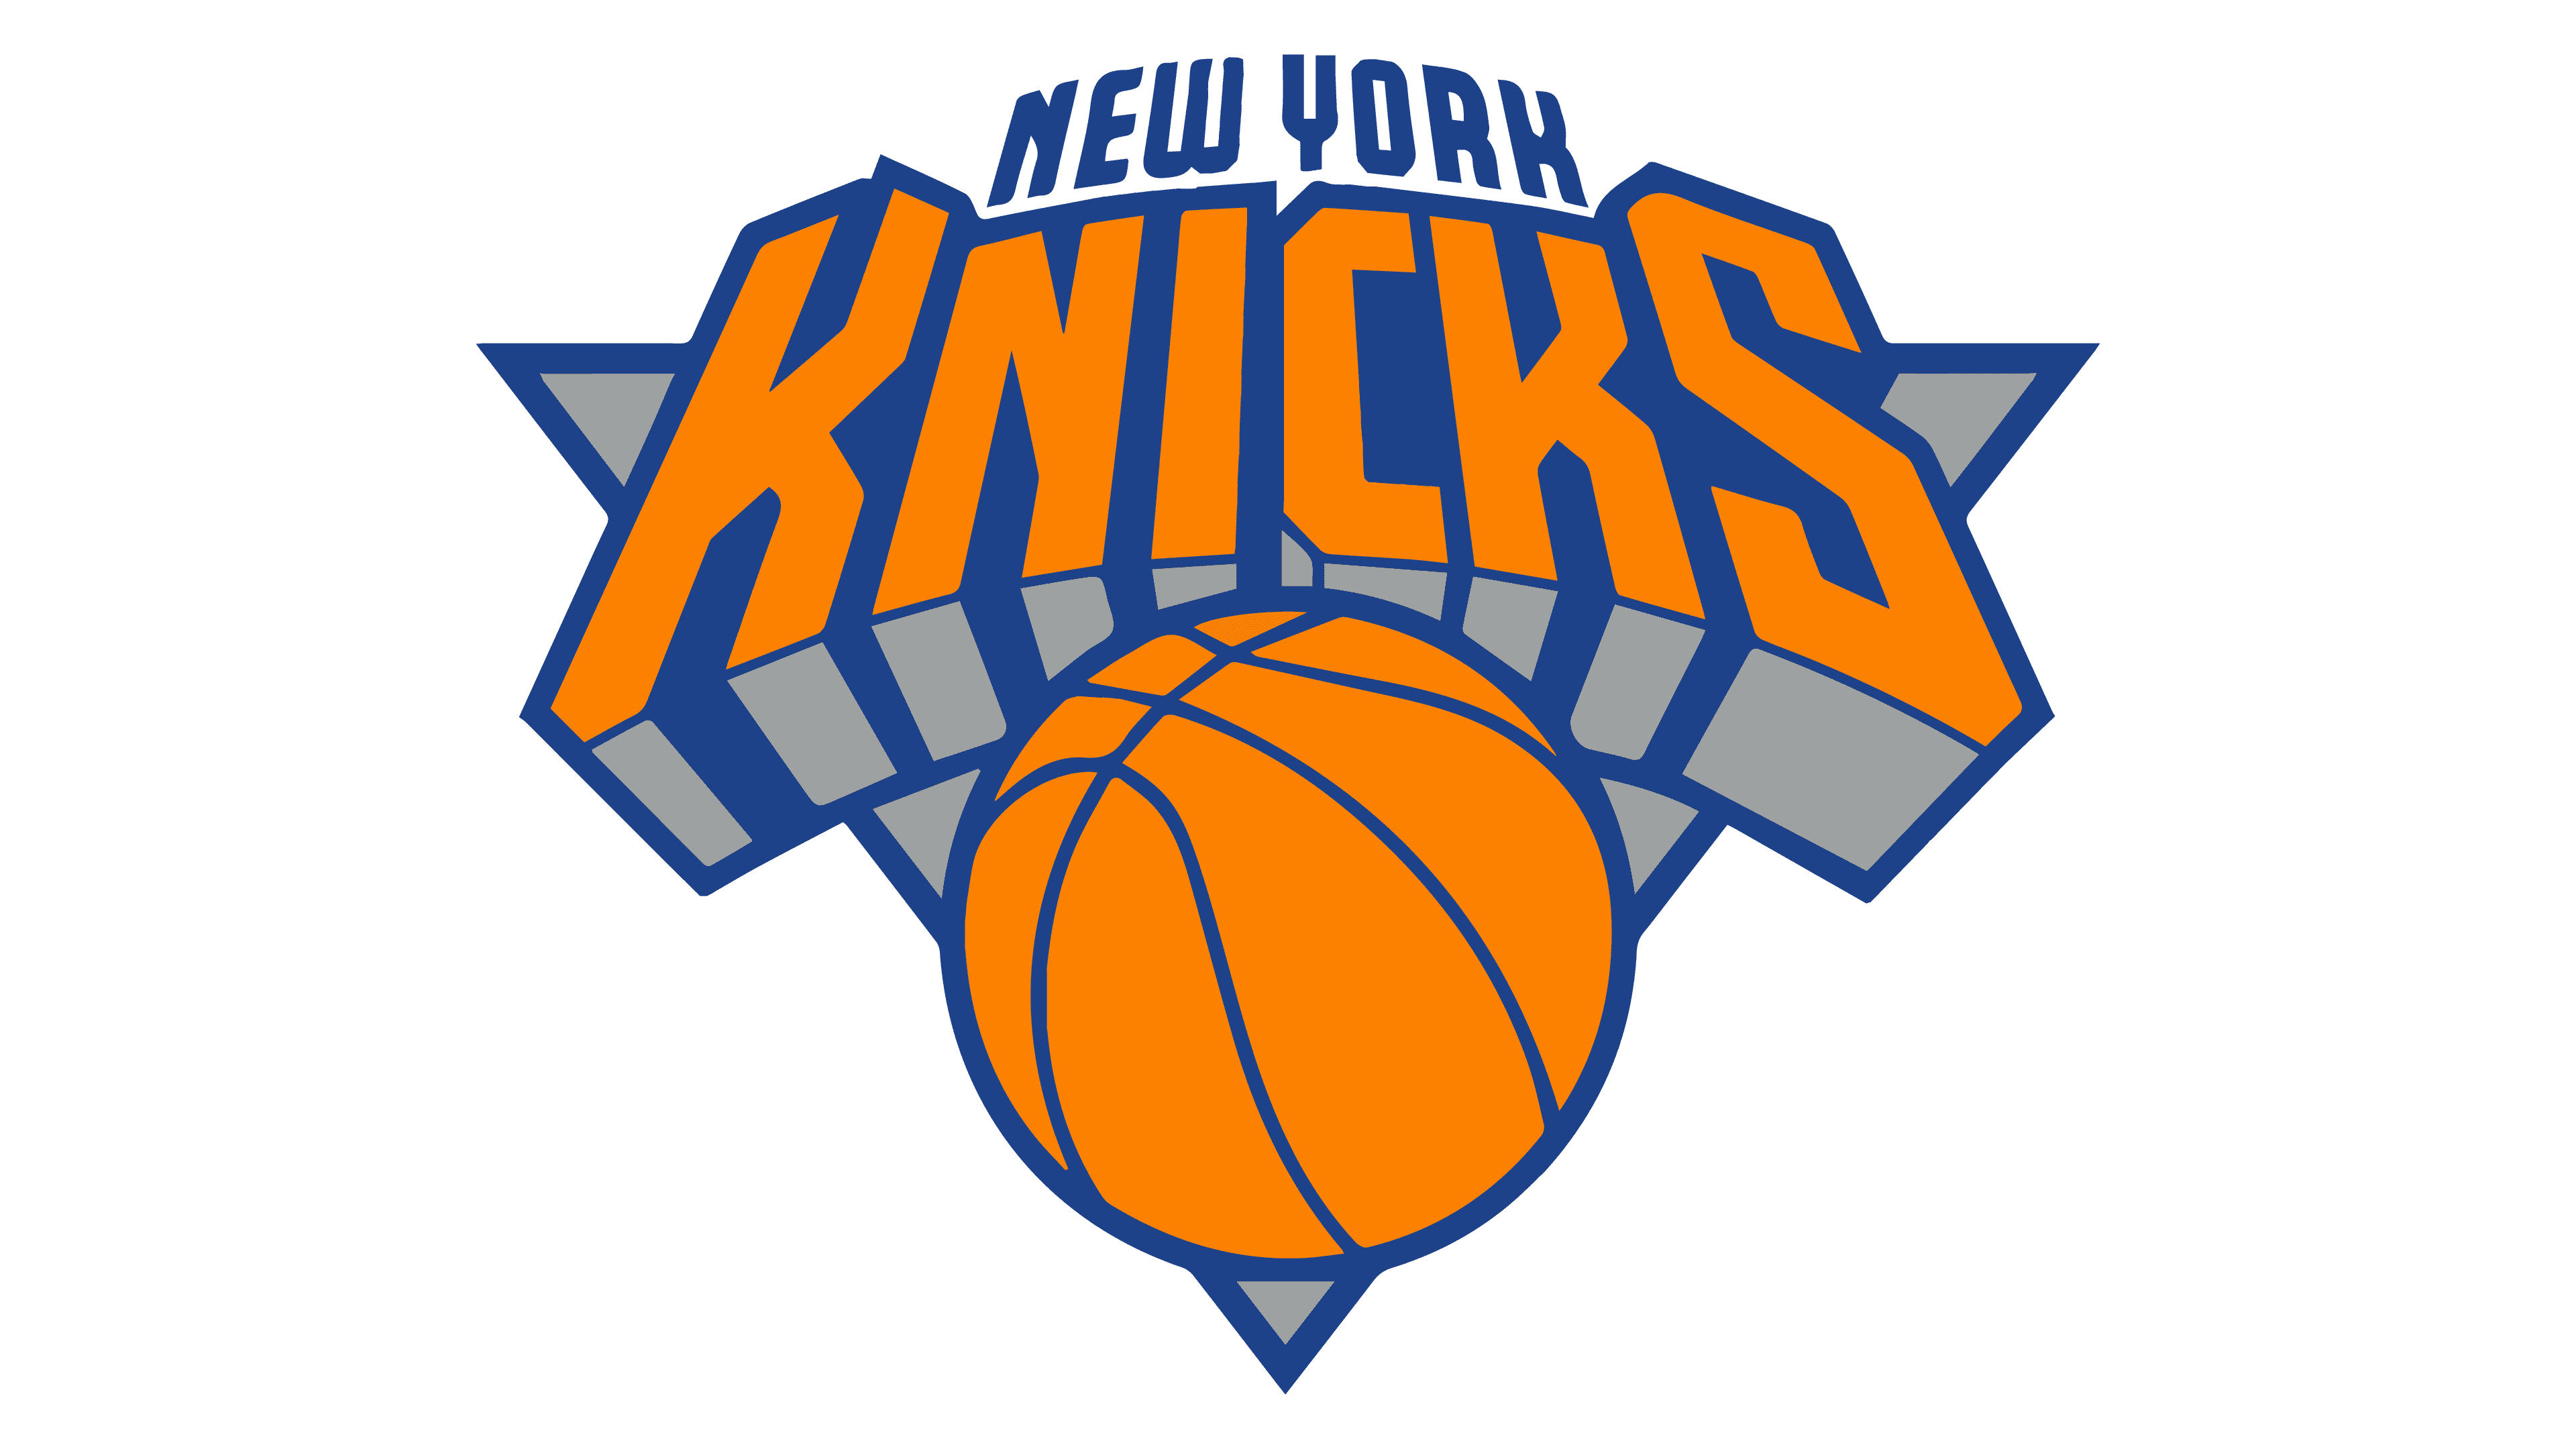 New York Knicks Logo and symbol, meaning, history, sign.